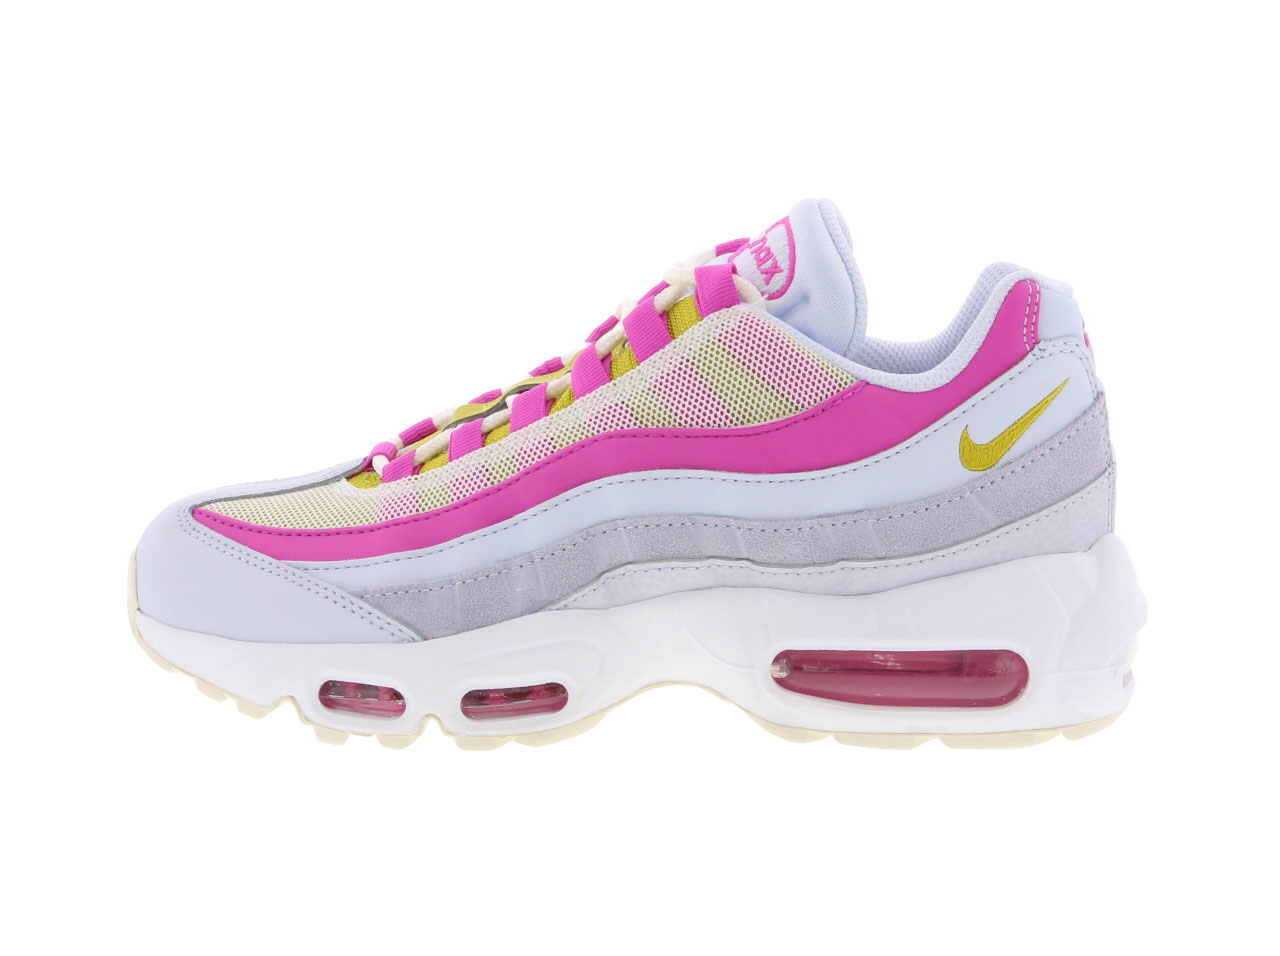 outlet nike air max 95